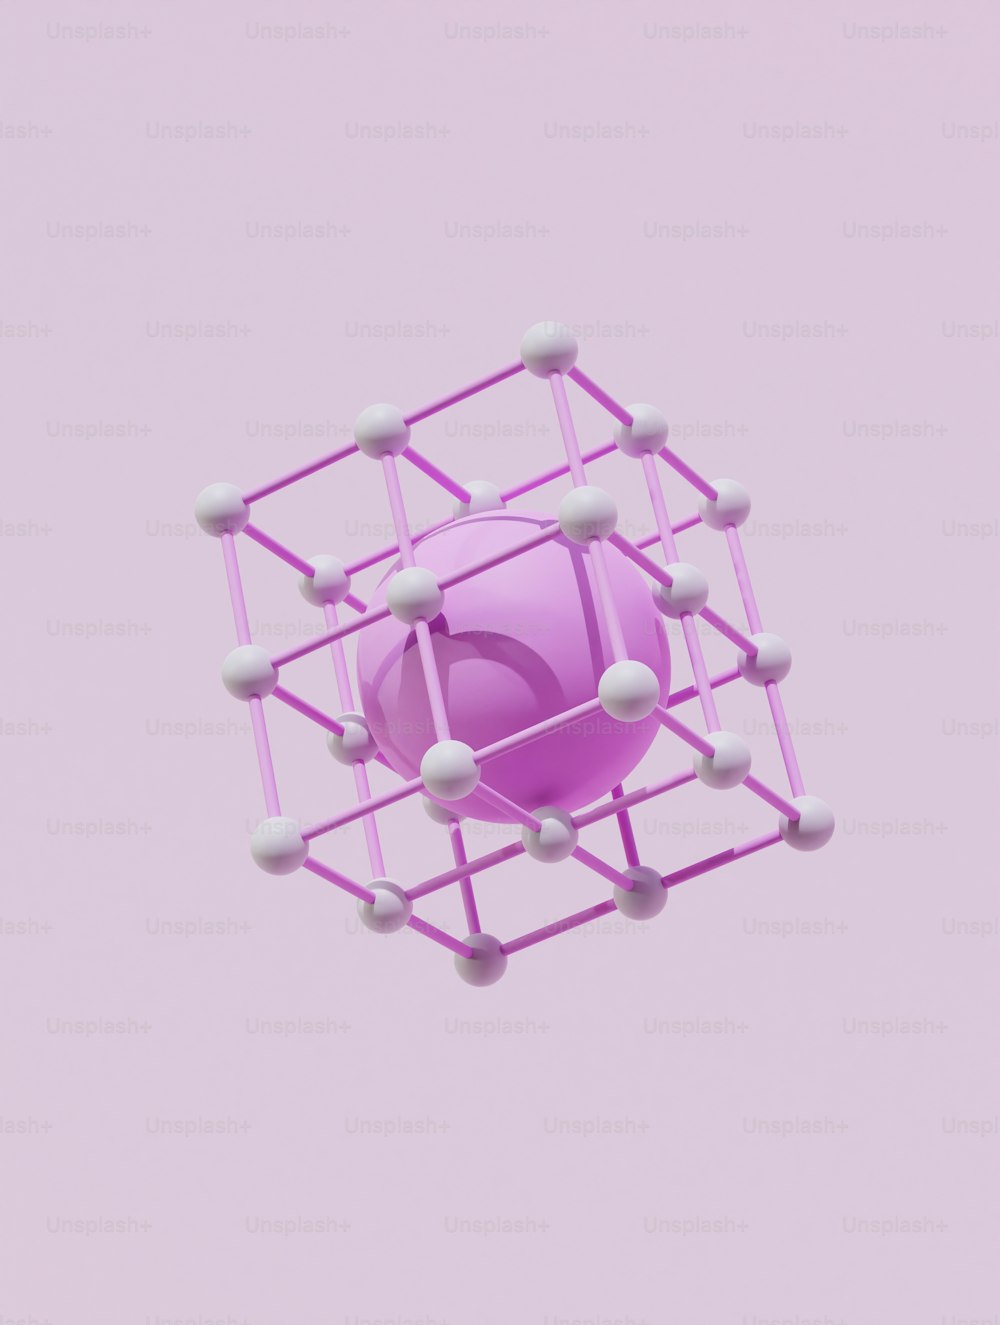 a purple object floating in the air on a pink background